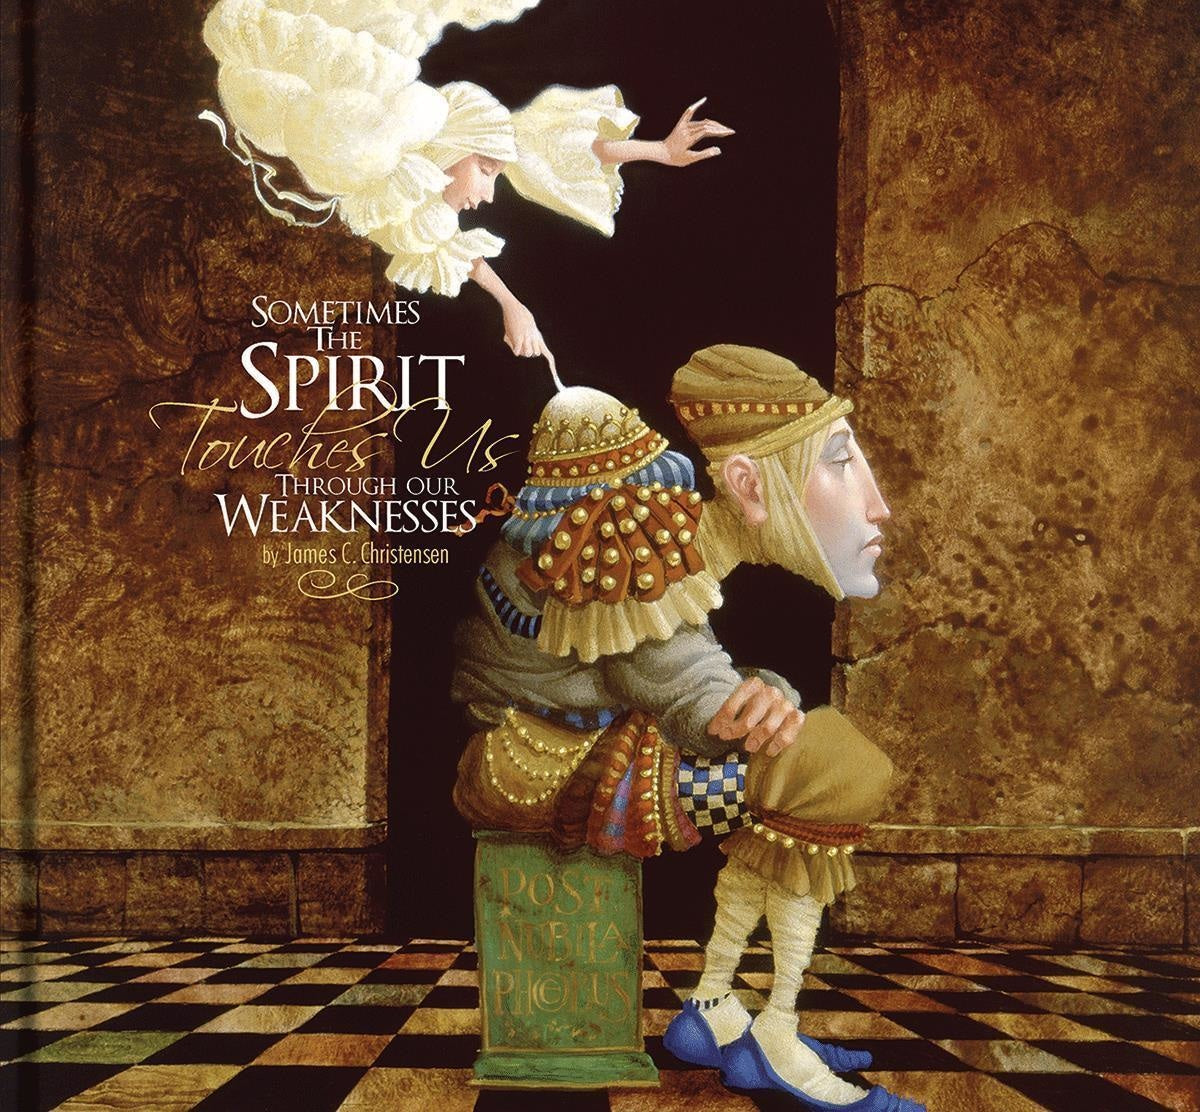 Sometimes the Spirit Touches Us Through Our Weaknesses Book with images by James Christensen